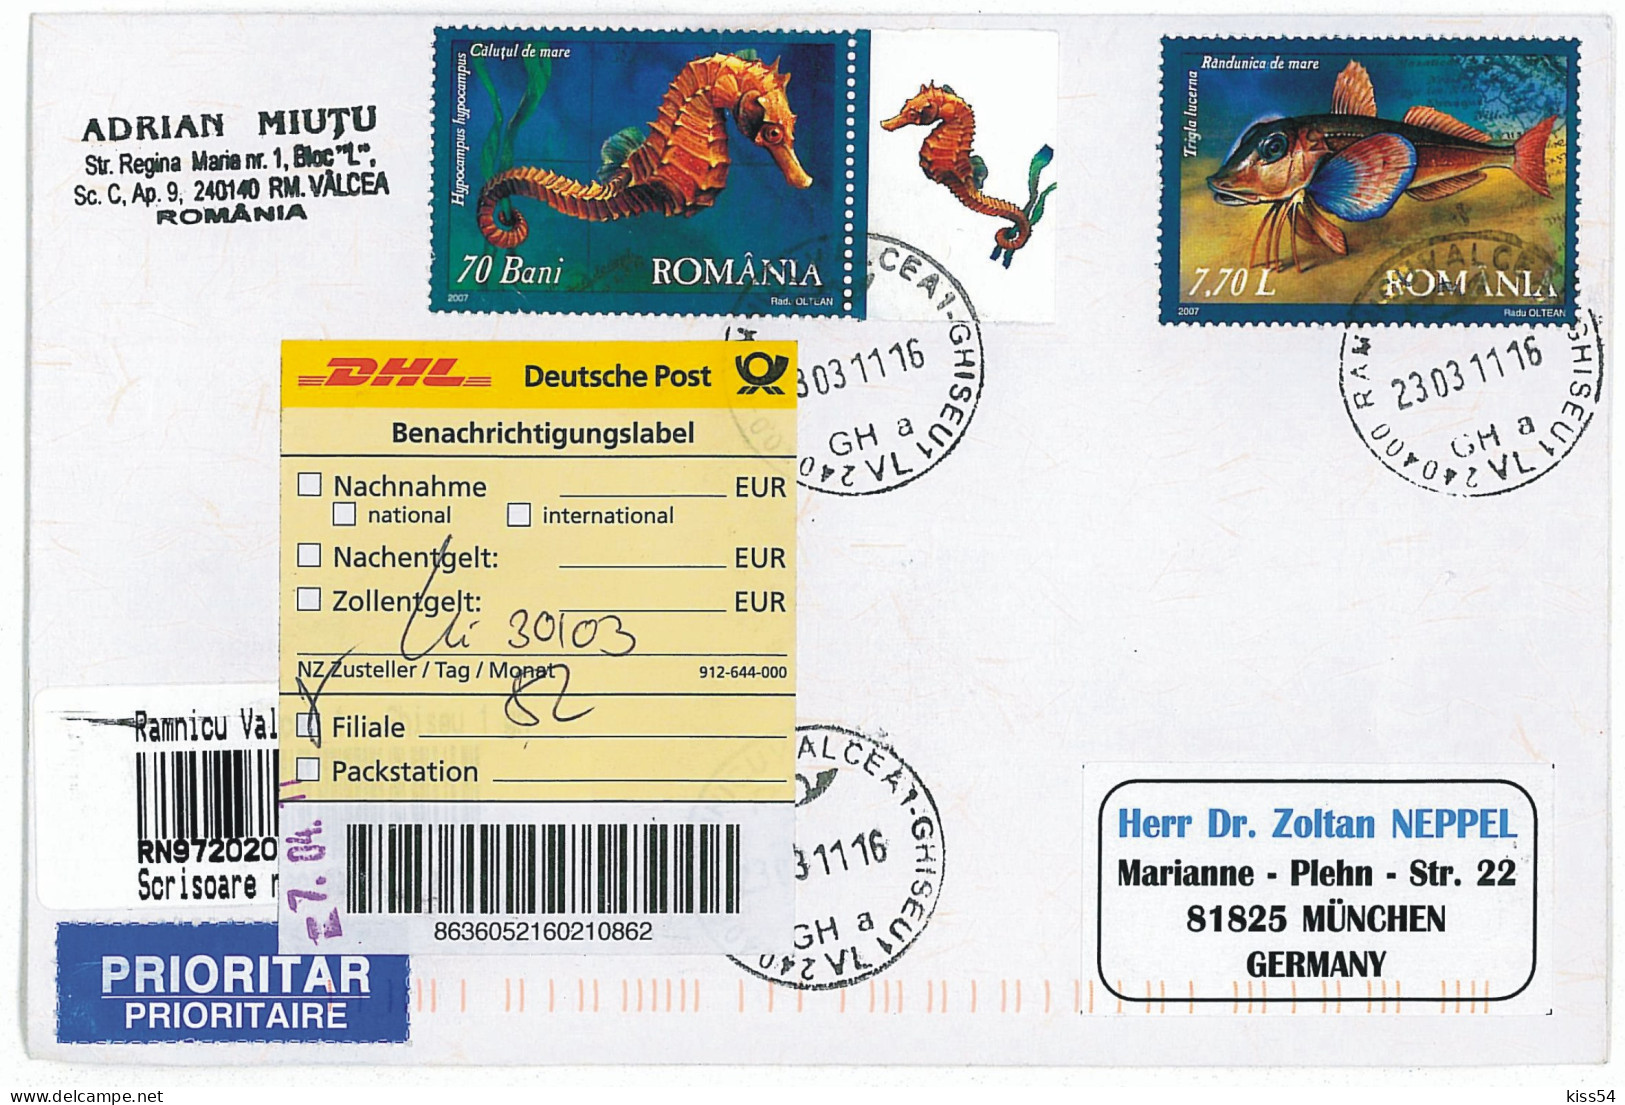 NCP 13 - 72020-a FISHES, Romania - INTERNATIONAL Registered, Stamp With TABS - 2011 - Covers & Documents